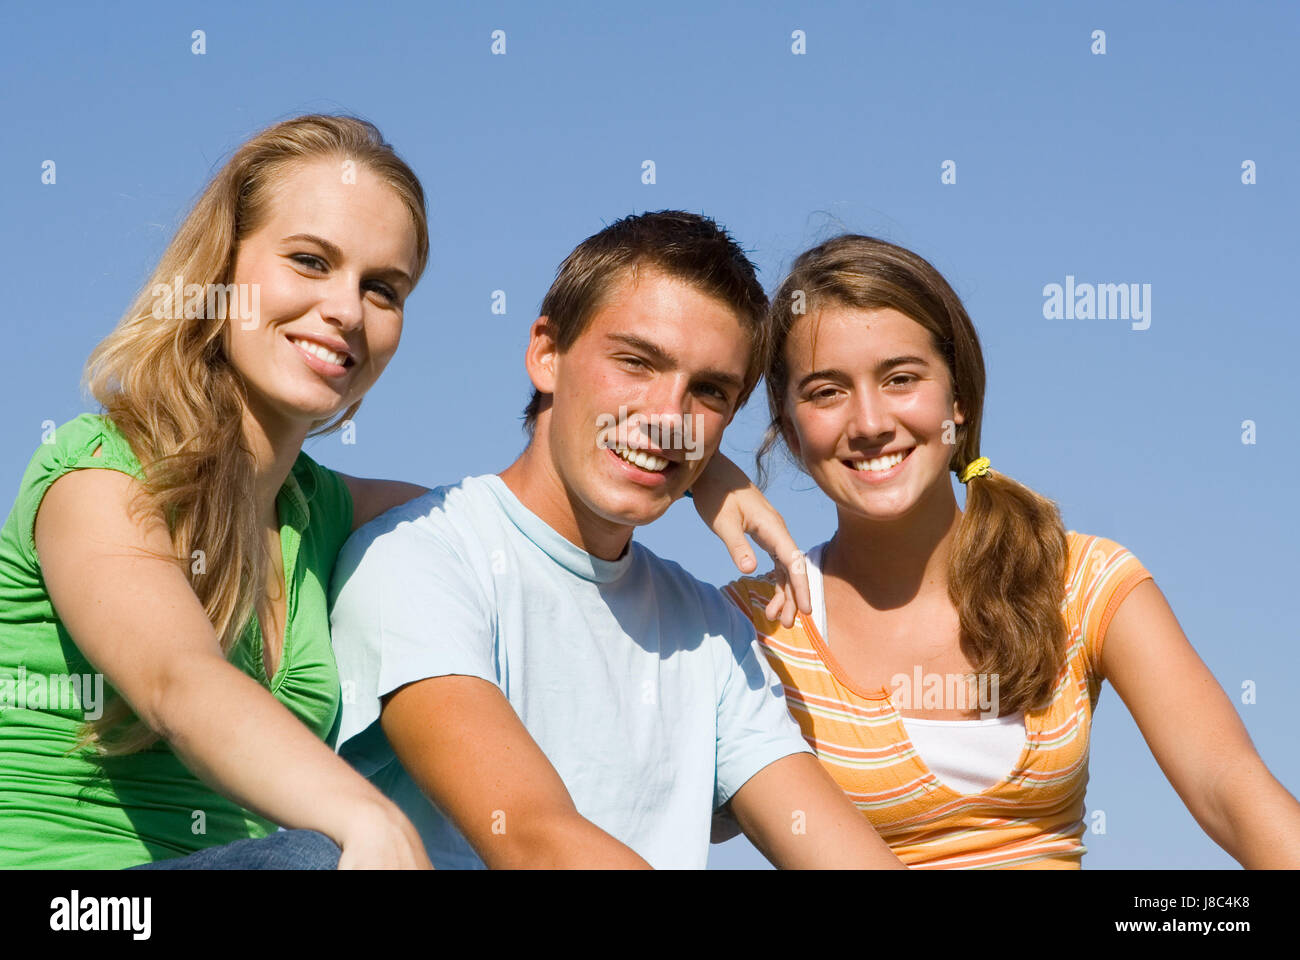 Threesome happy playful giggling laughing images